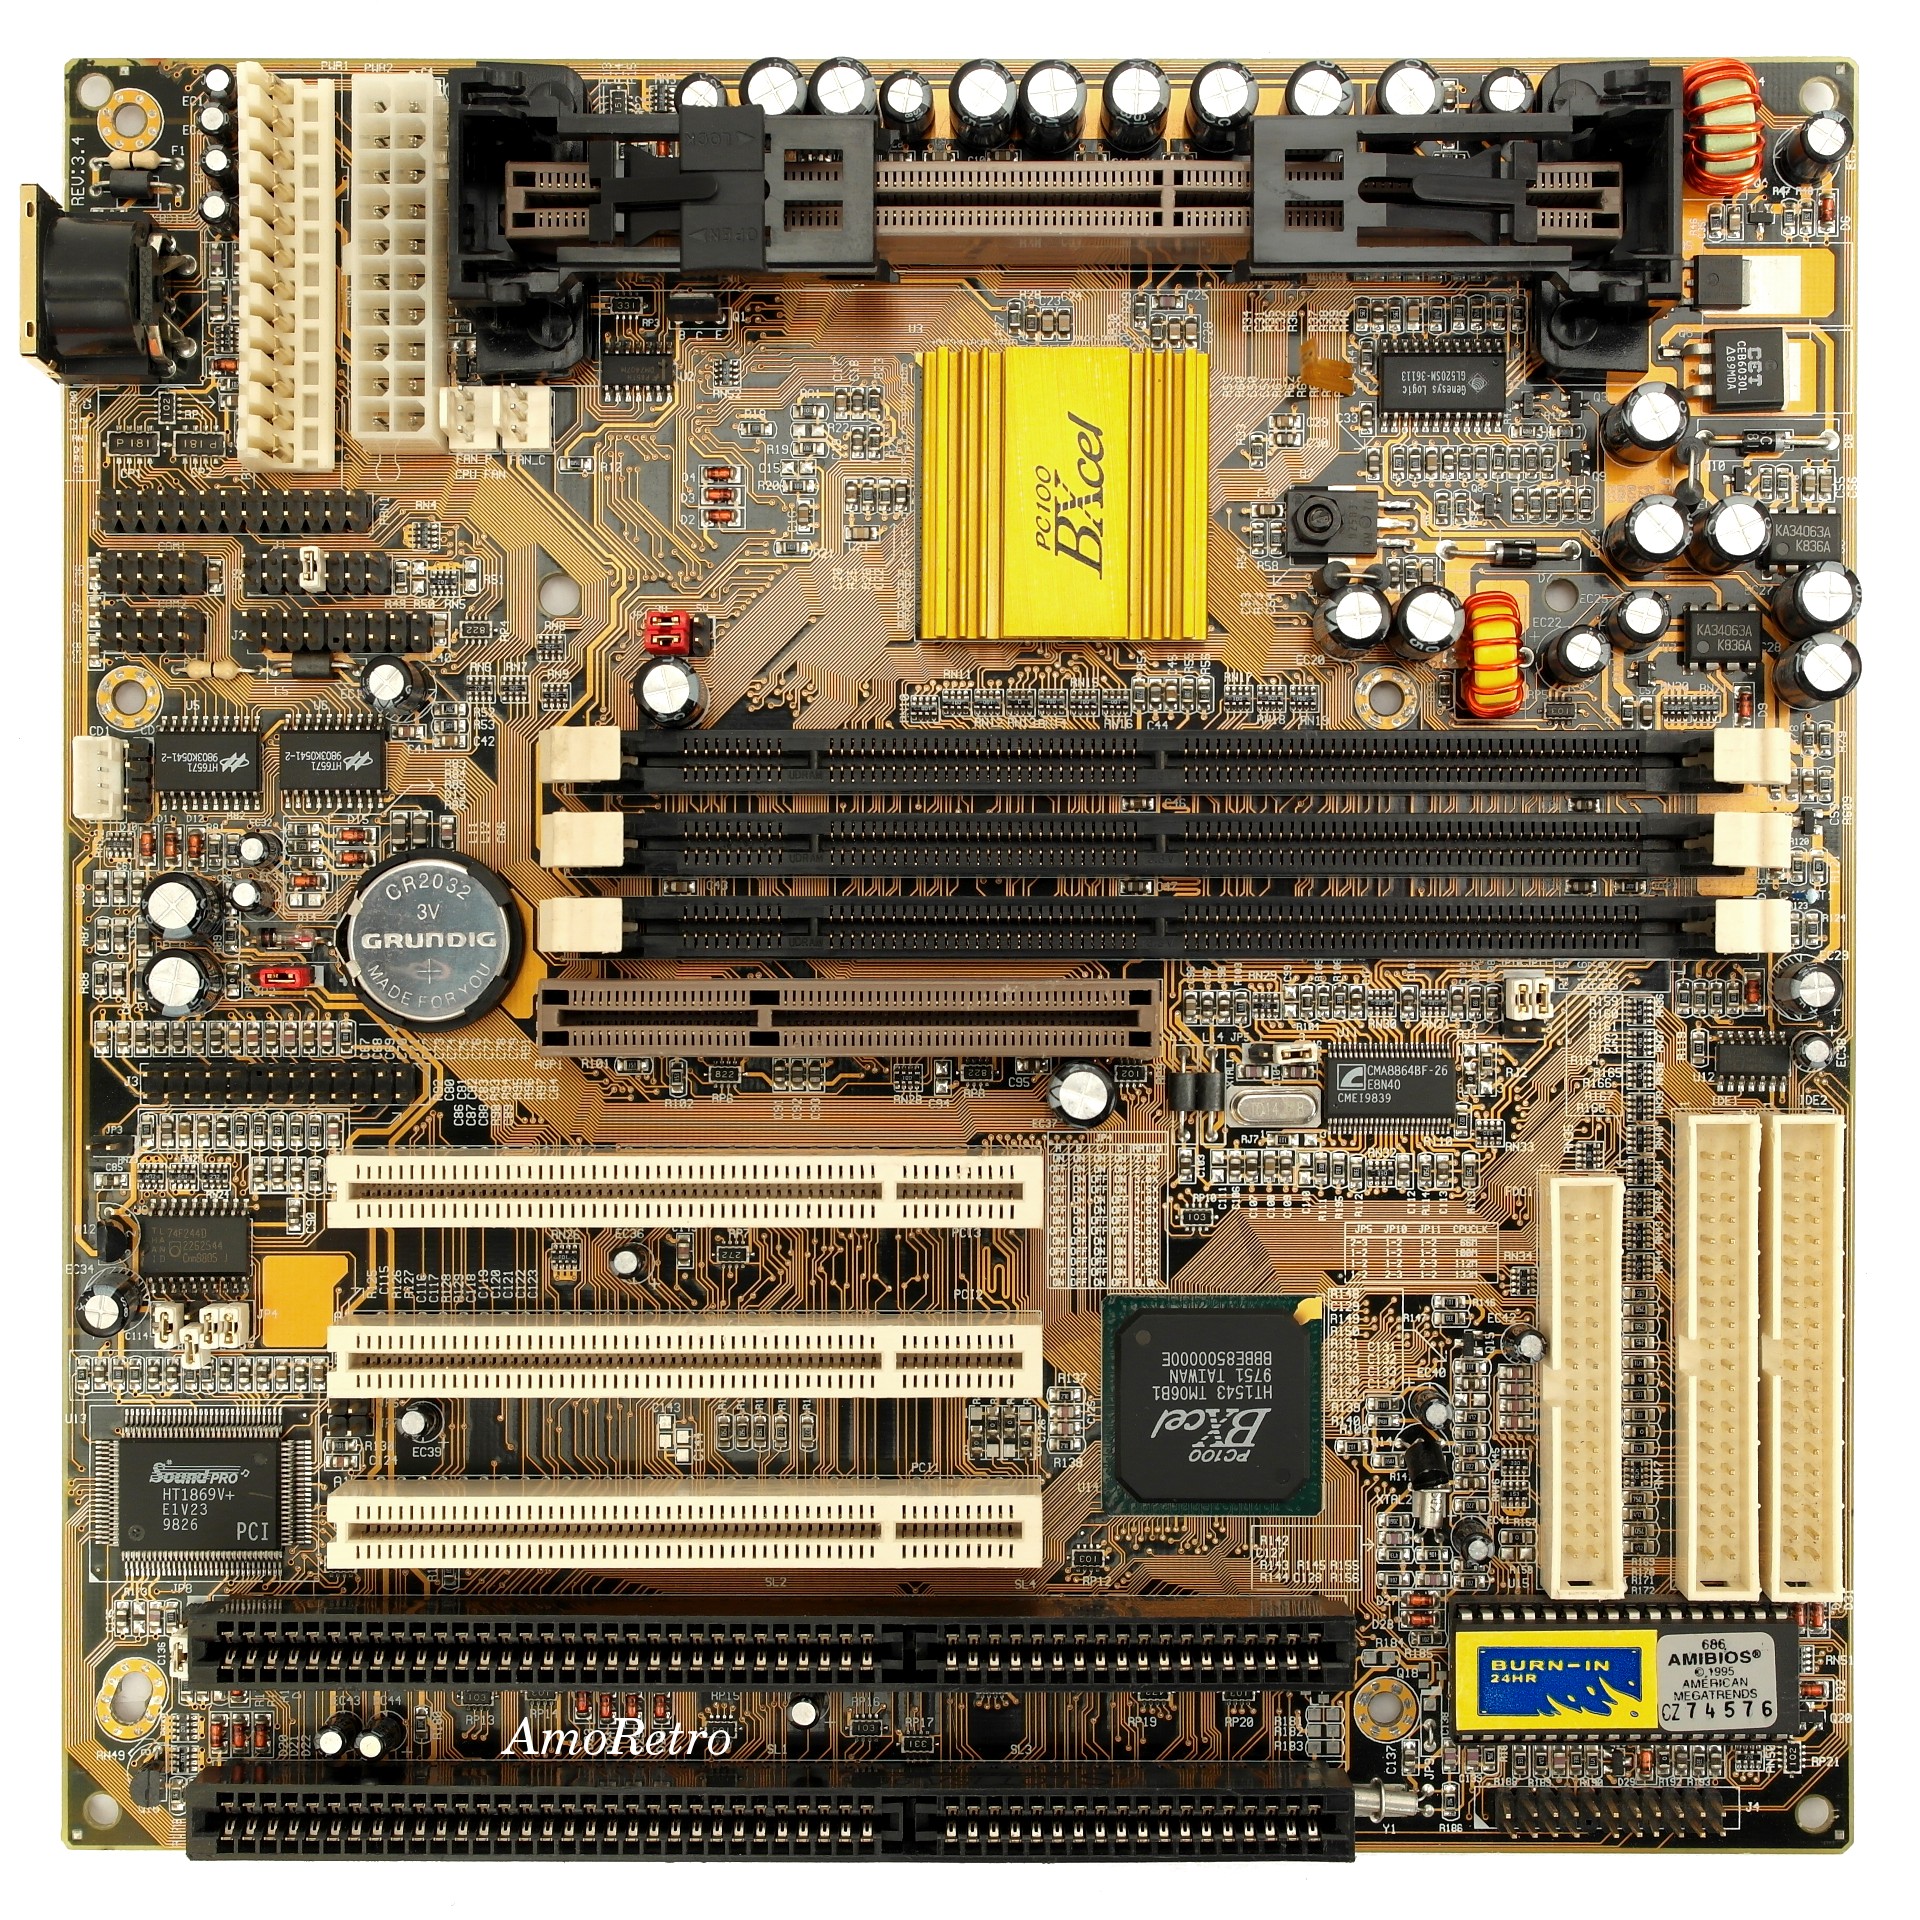 AT-Style M726 Slot 1 Motherboard, AGP, PCI, ISA, PS/2 Mouse+Sound, 3Dfx